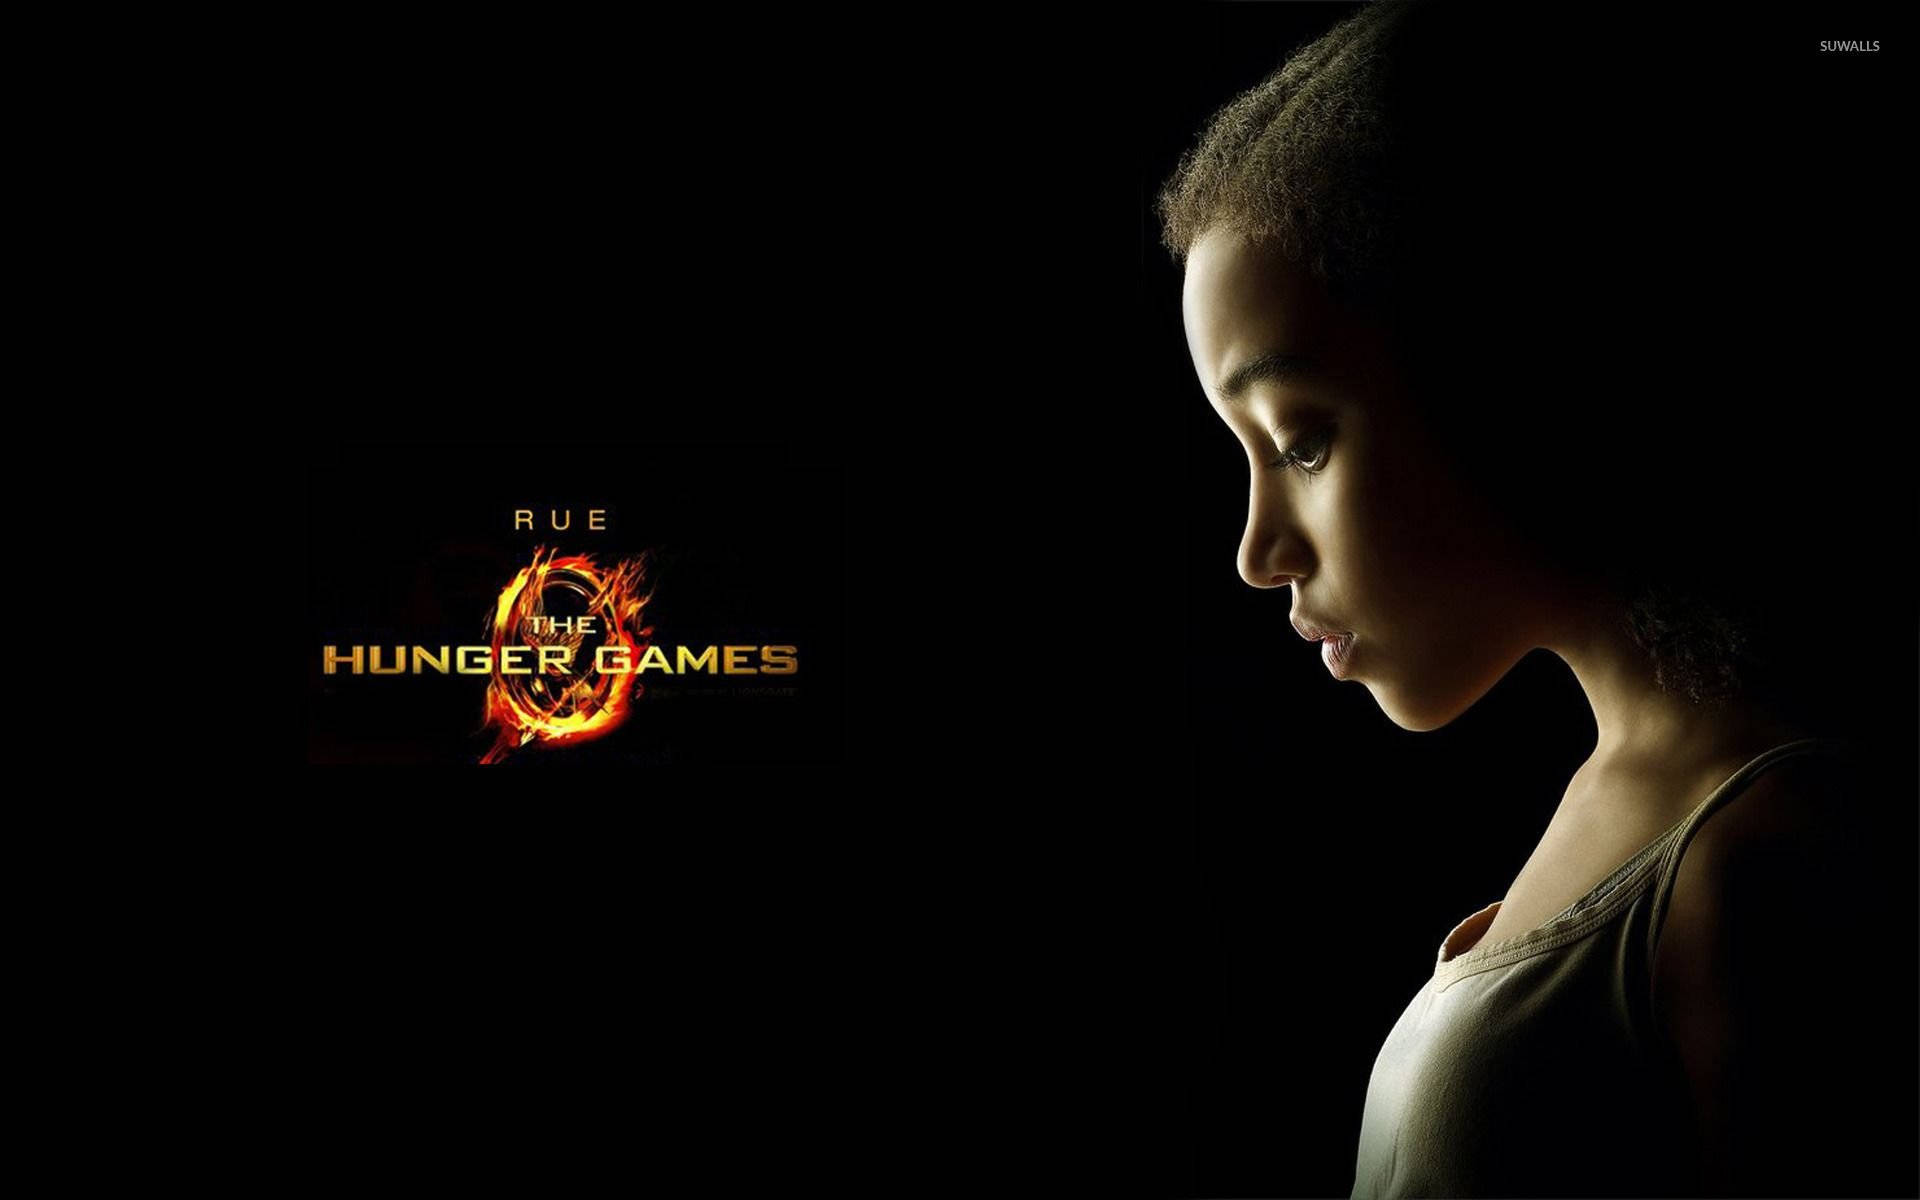 The Hunger Games Rue Poster Background